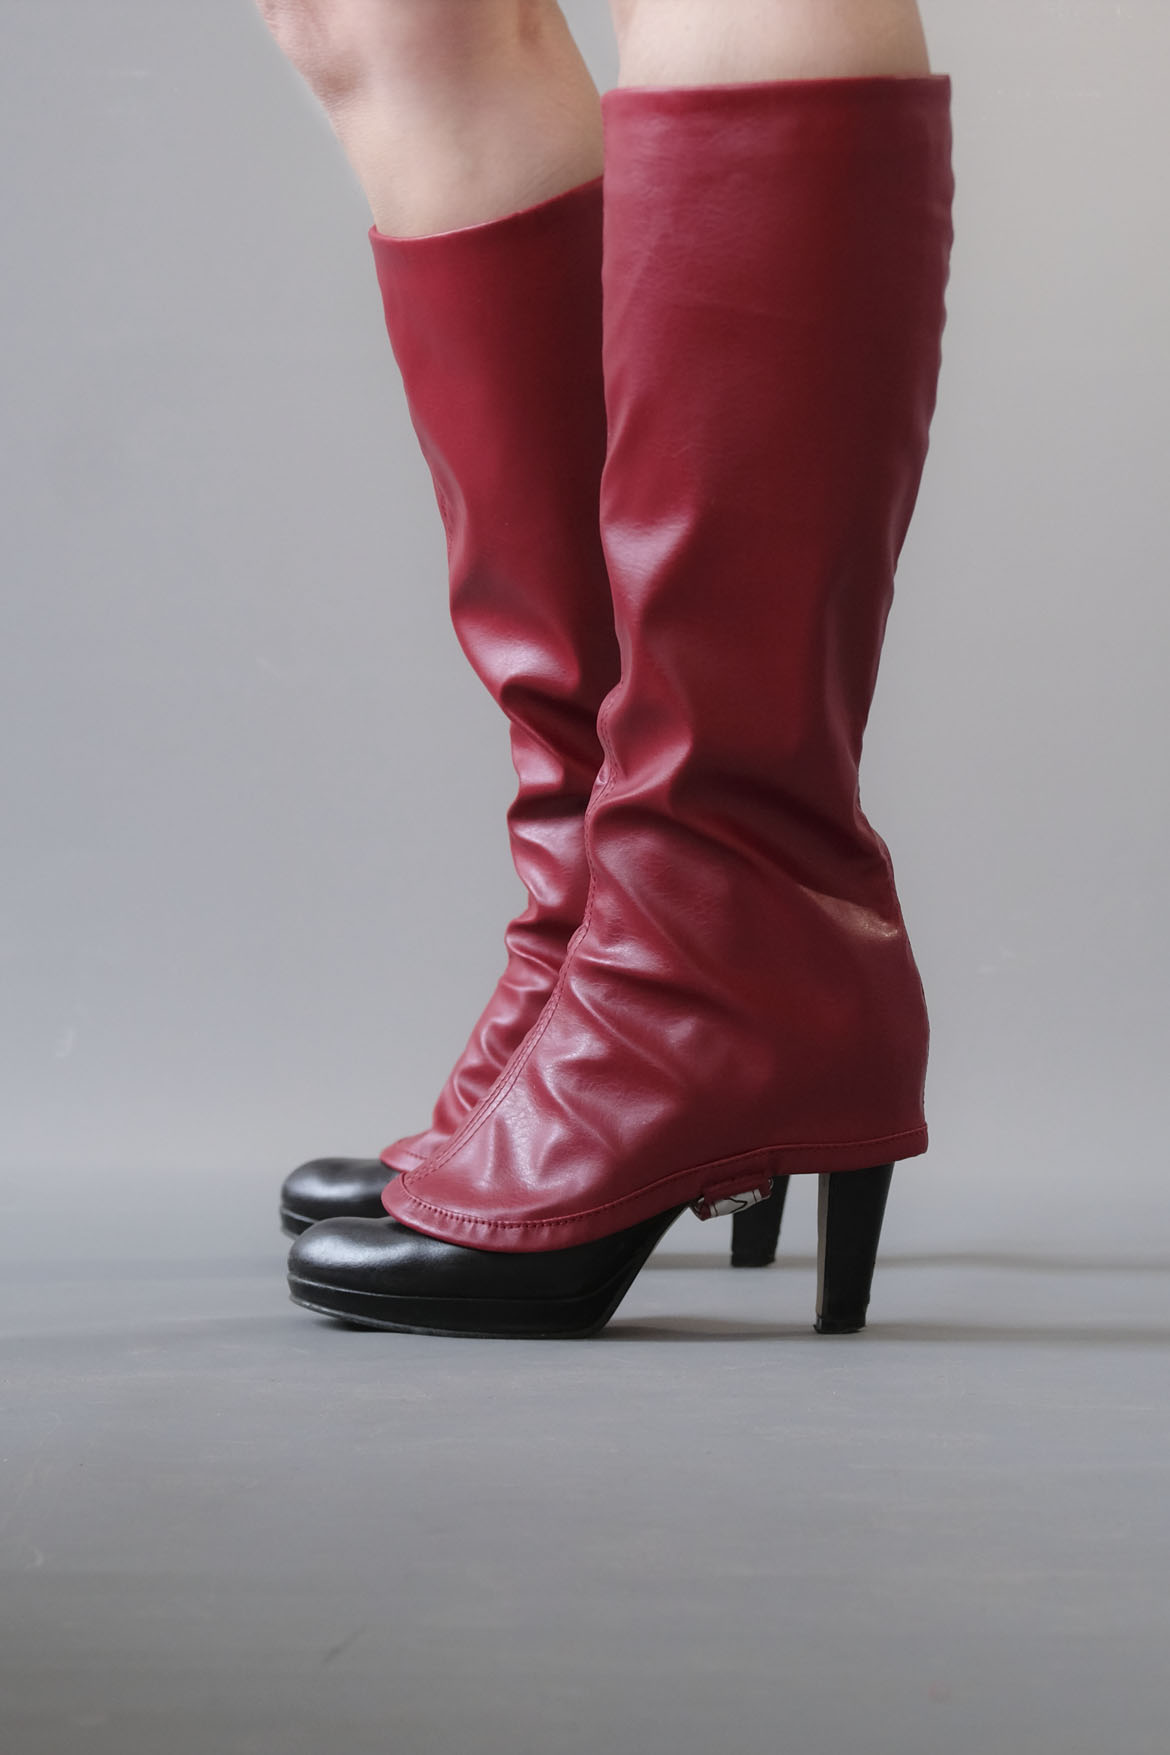 fake leather gaiters red